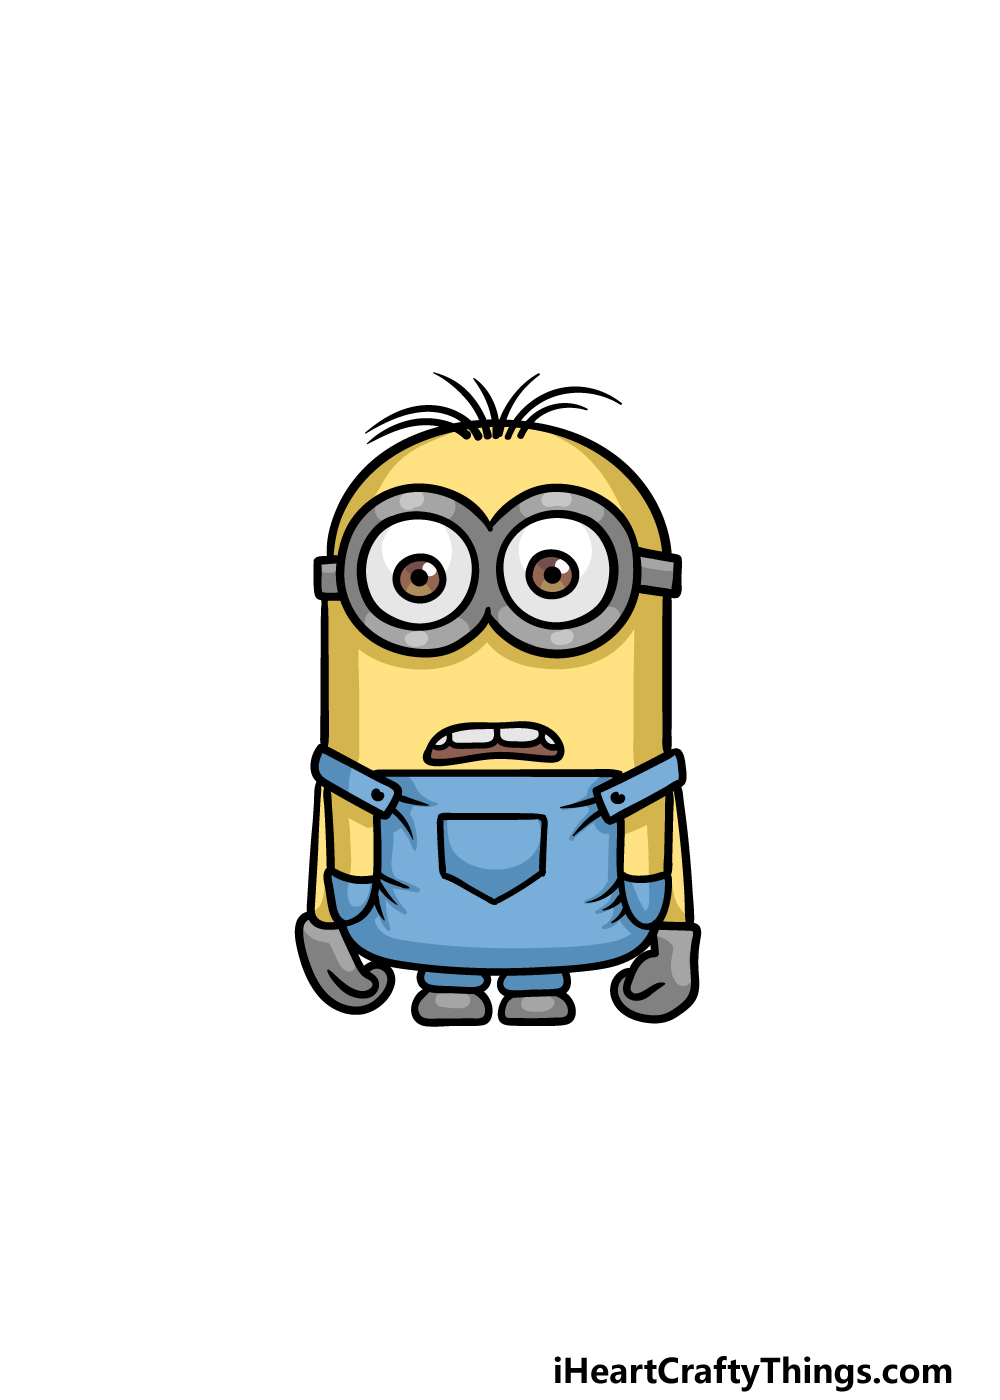 Minion Drawing - How To Draw A Minion Step By Step